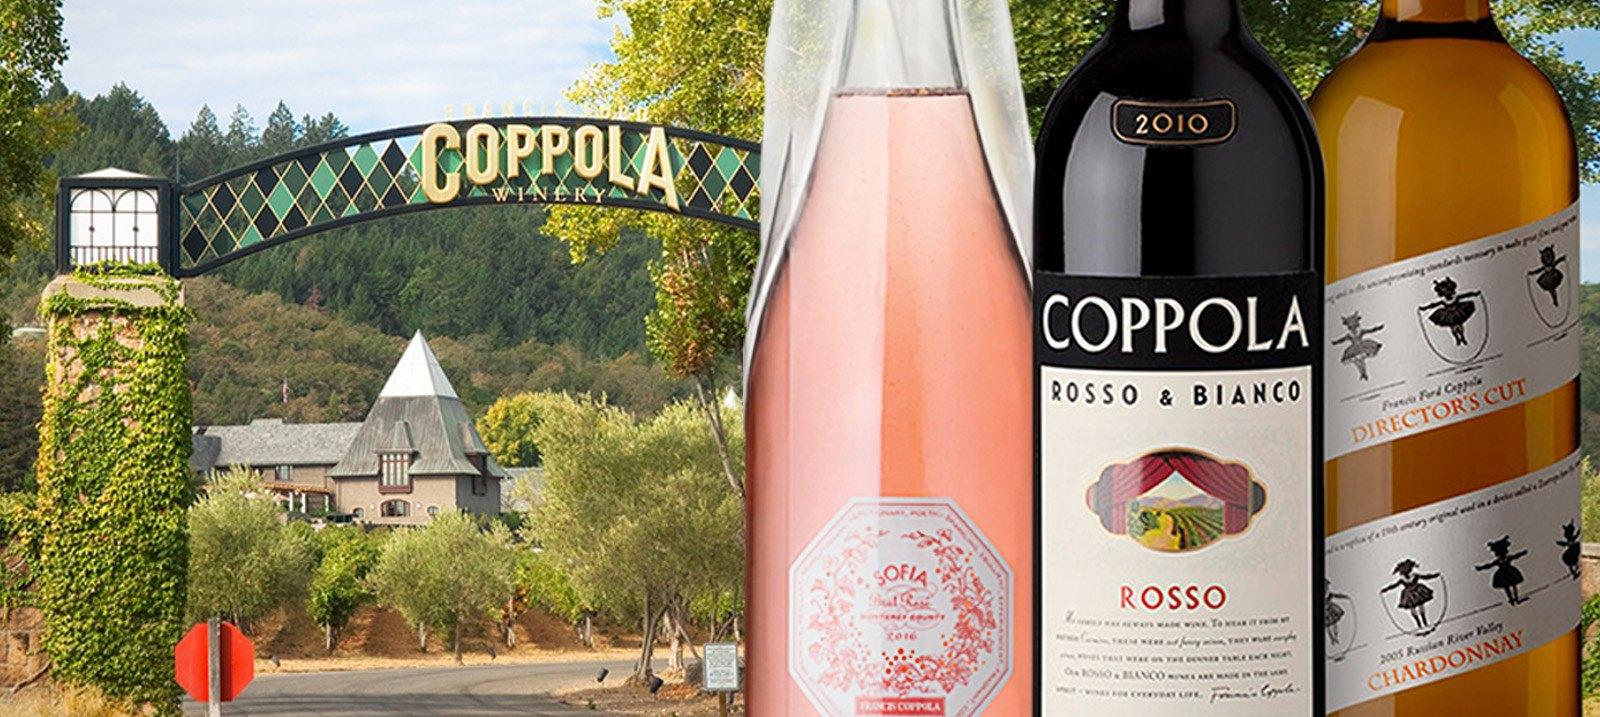 FRANCIS FORD COPPOLA WINERY 